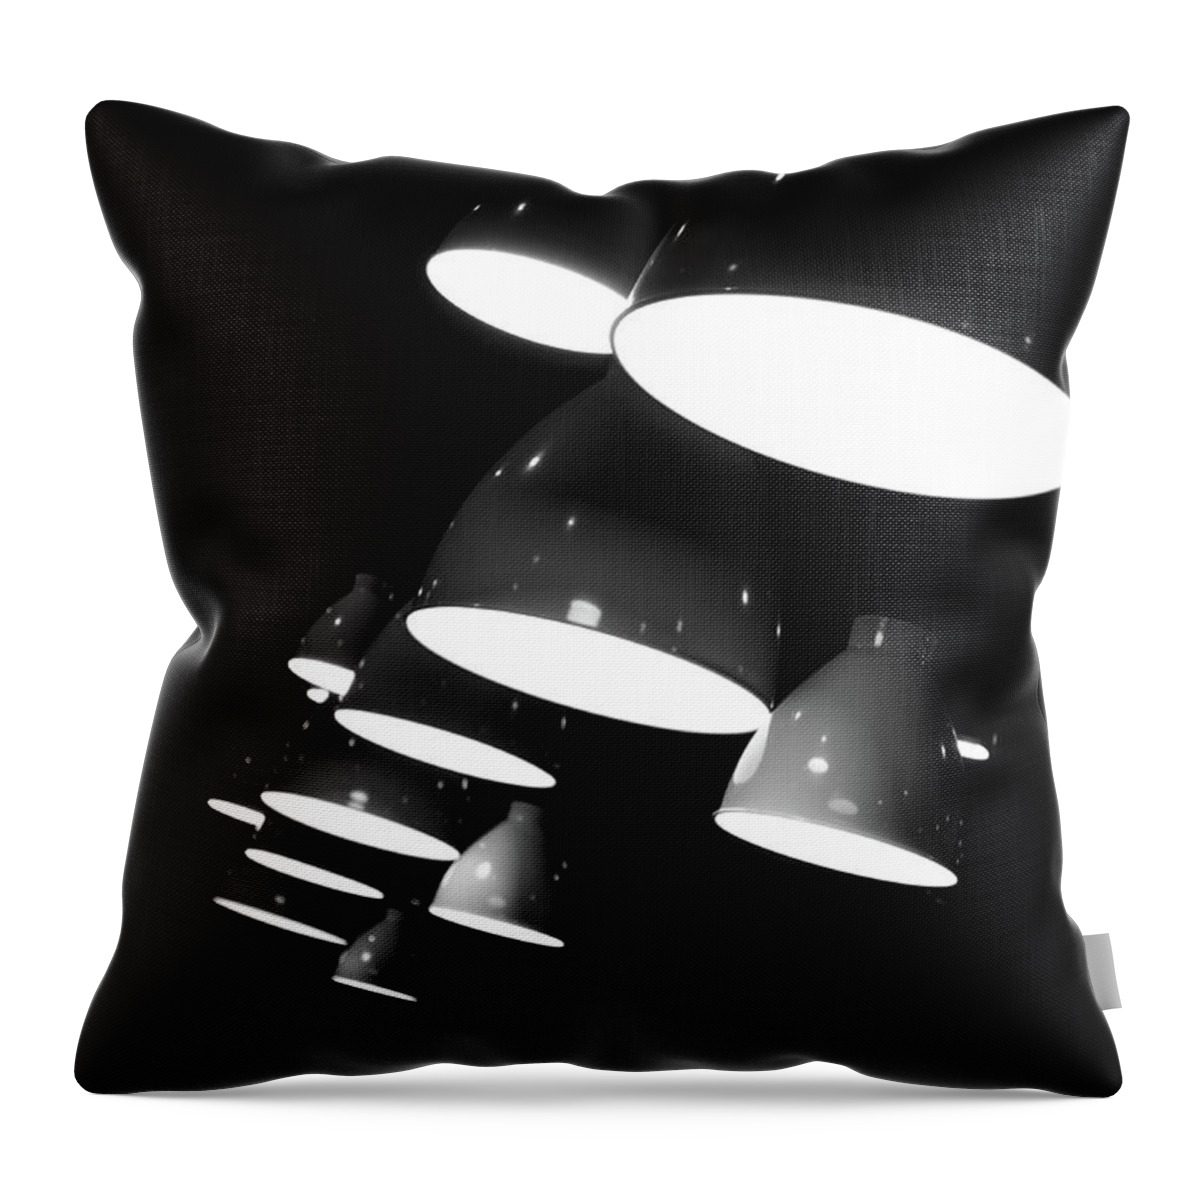 Lamp Throw Pillow featuring the photograph Hanging Lamps by Dutourdumonde Photography